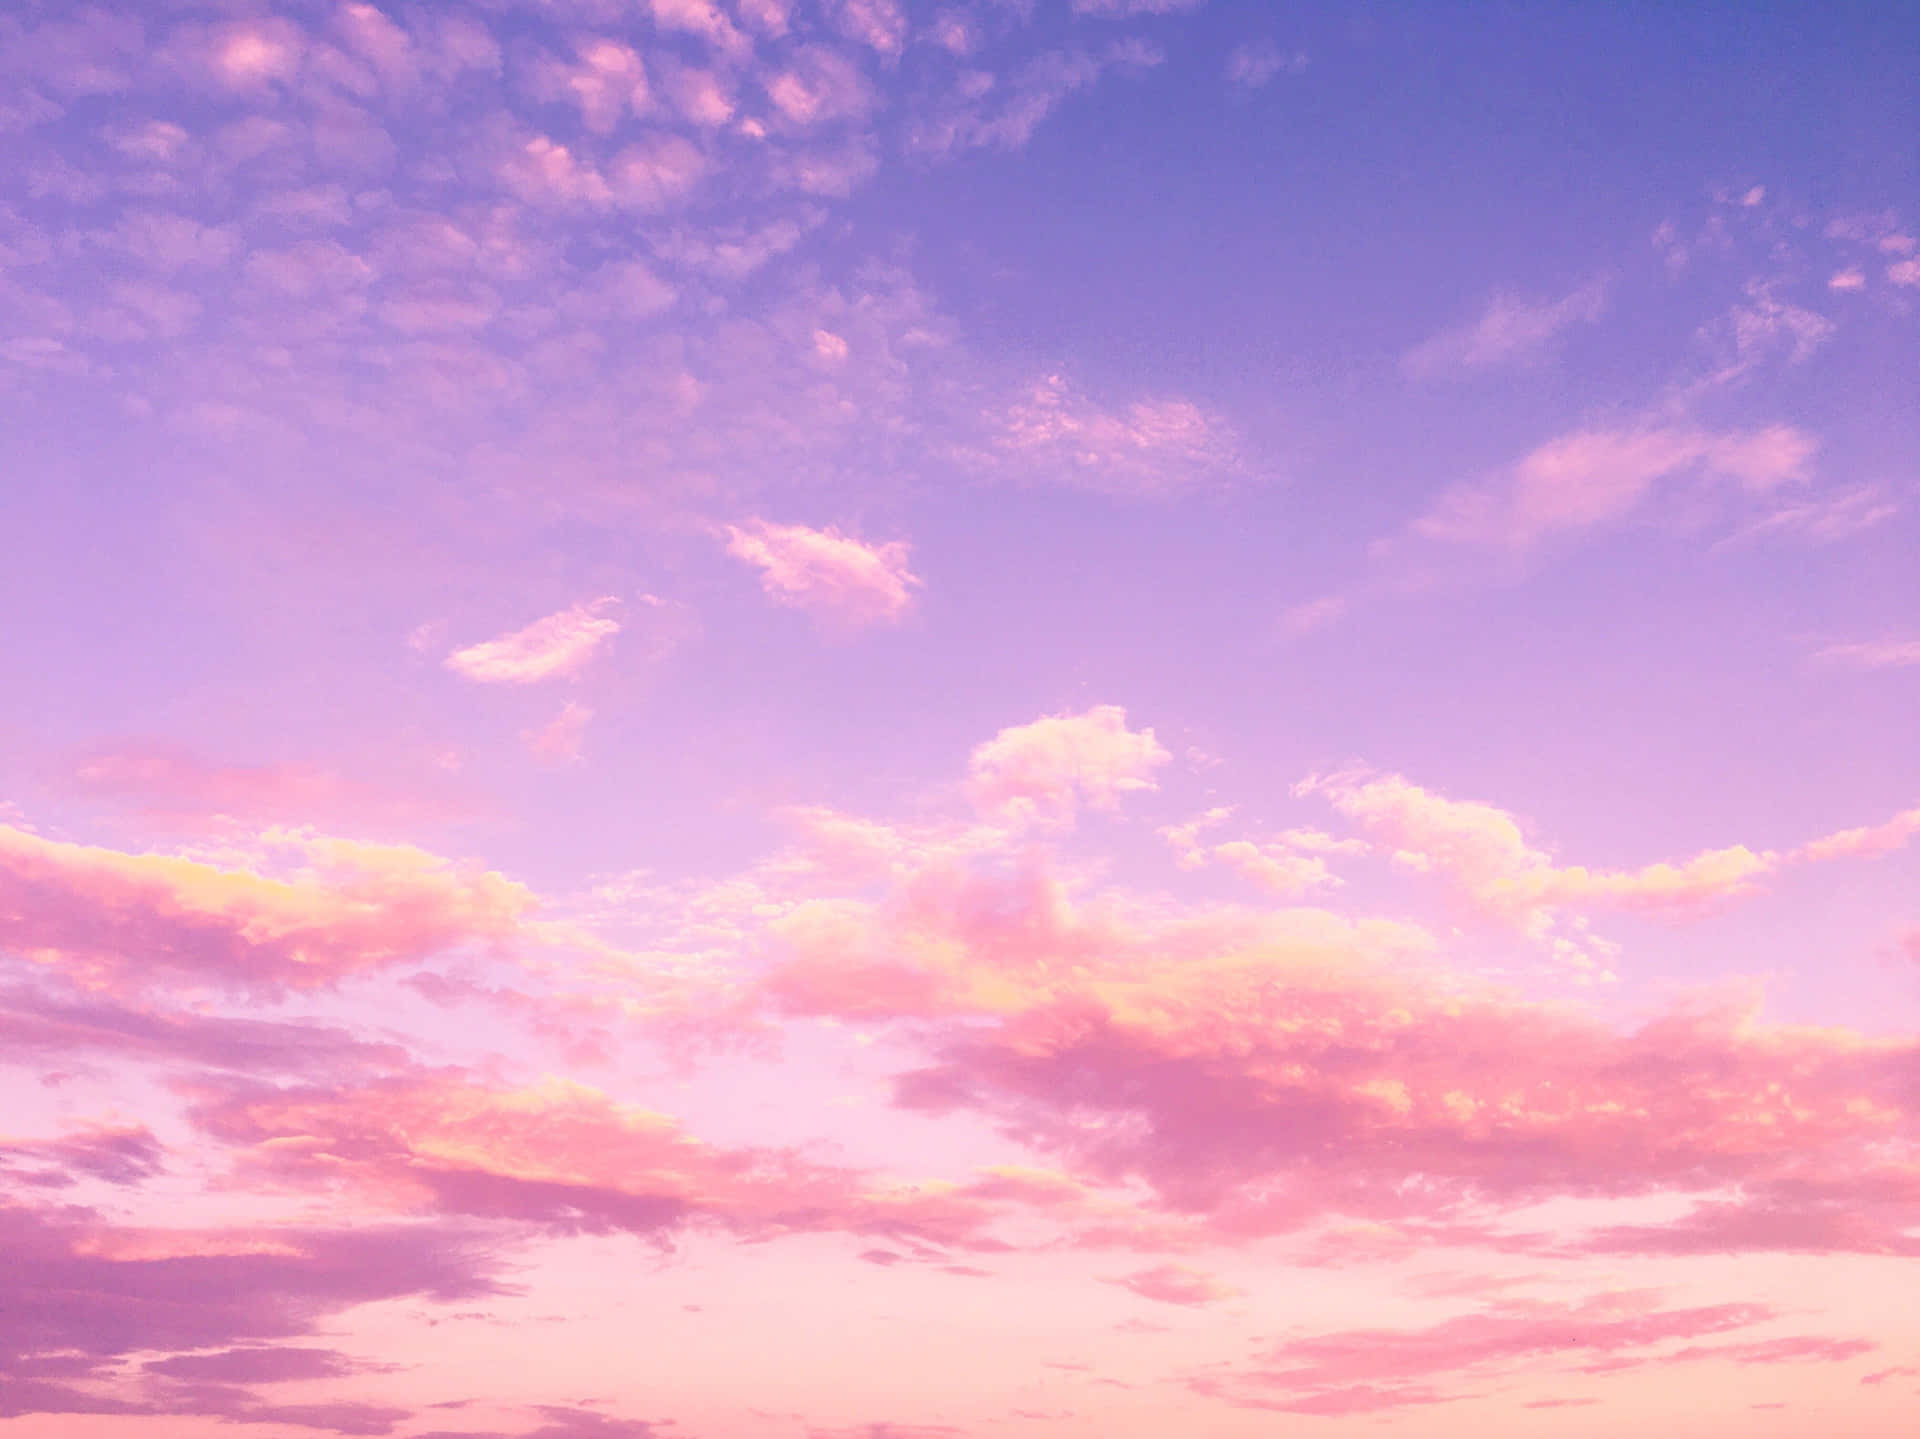 Aesthetic Pastel Purple Sky With Clouds Background